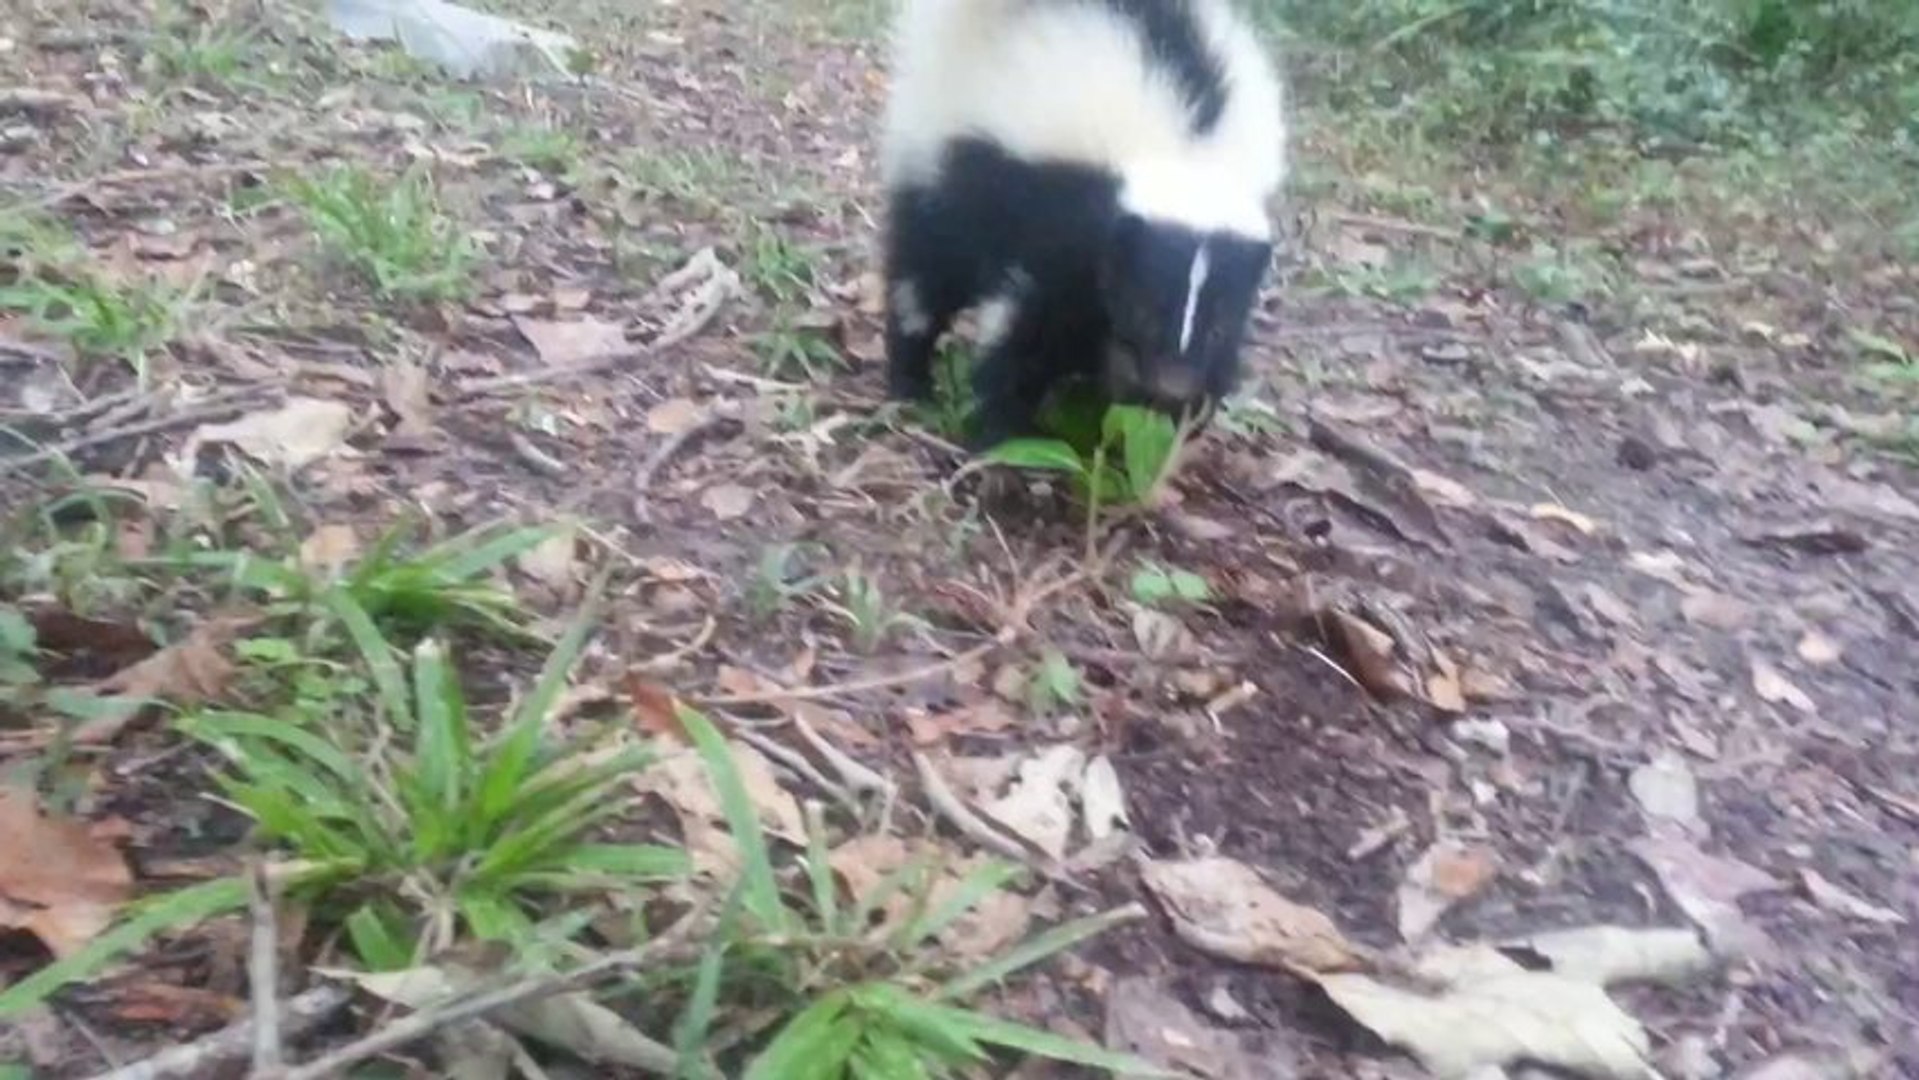 Vicious Baby Skunk Attack Just Looks Cute